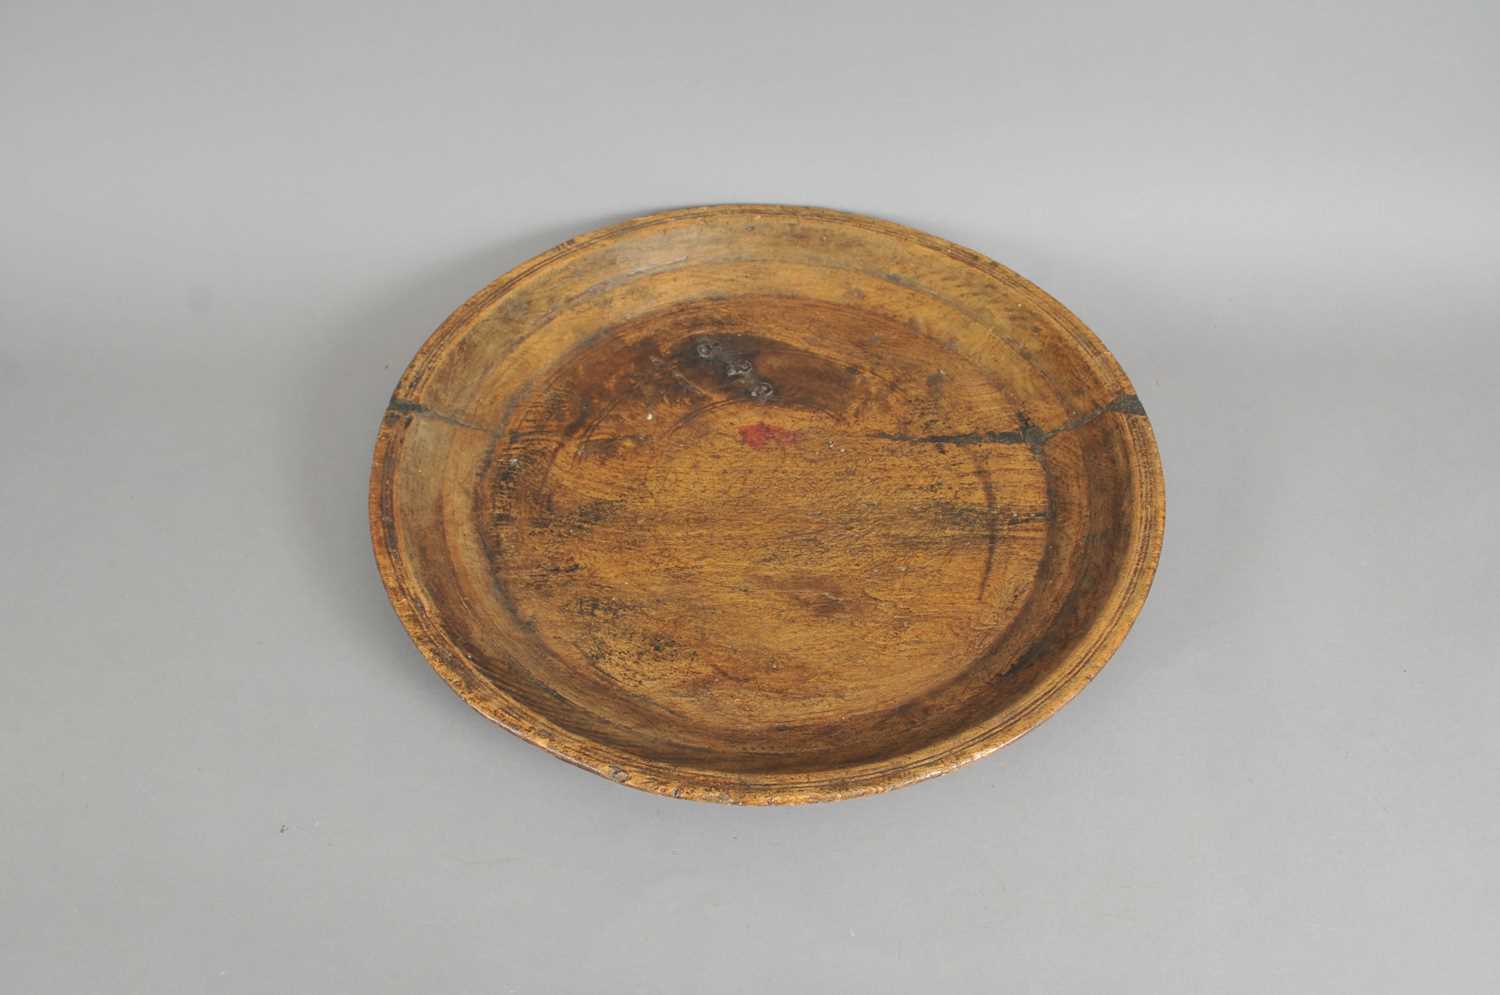 A large 18th century rustic farmhouse hewn shallow bowl / charger